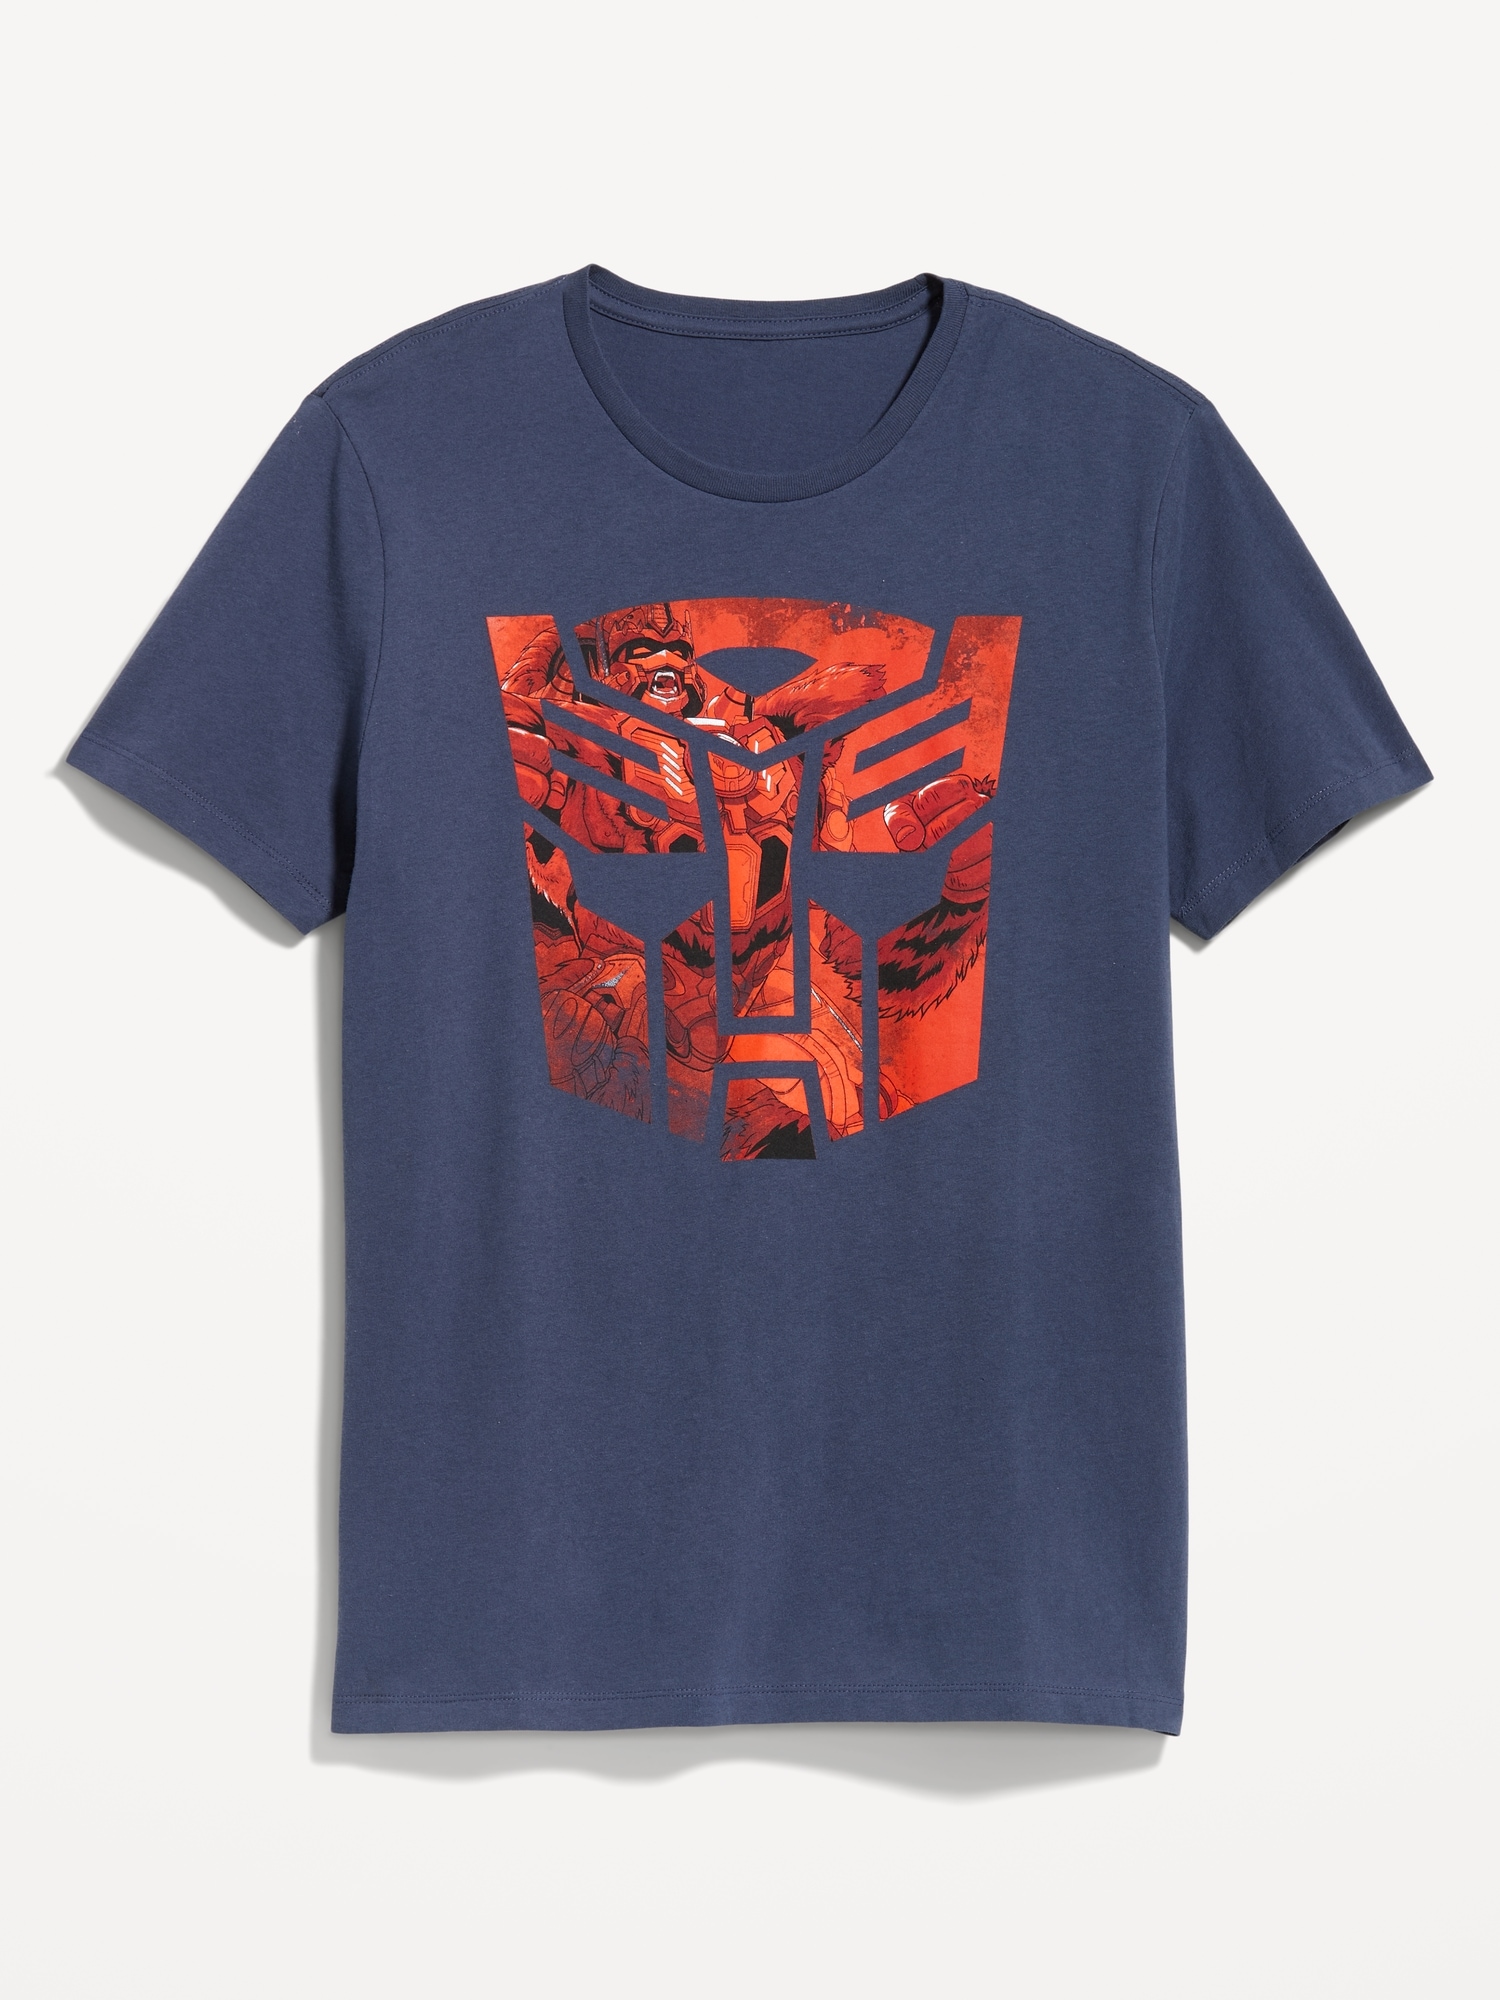 Old Navy Transformers™ Gender-Neutral T-Shirt for Adults blue. 1